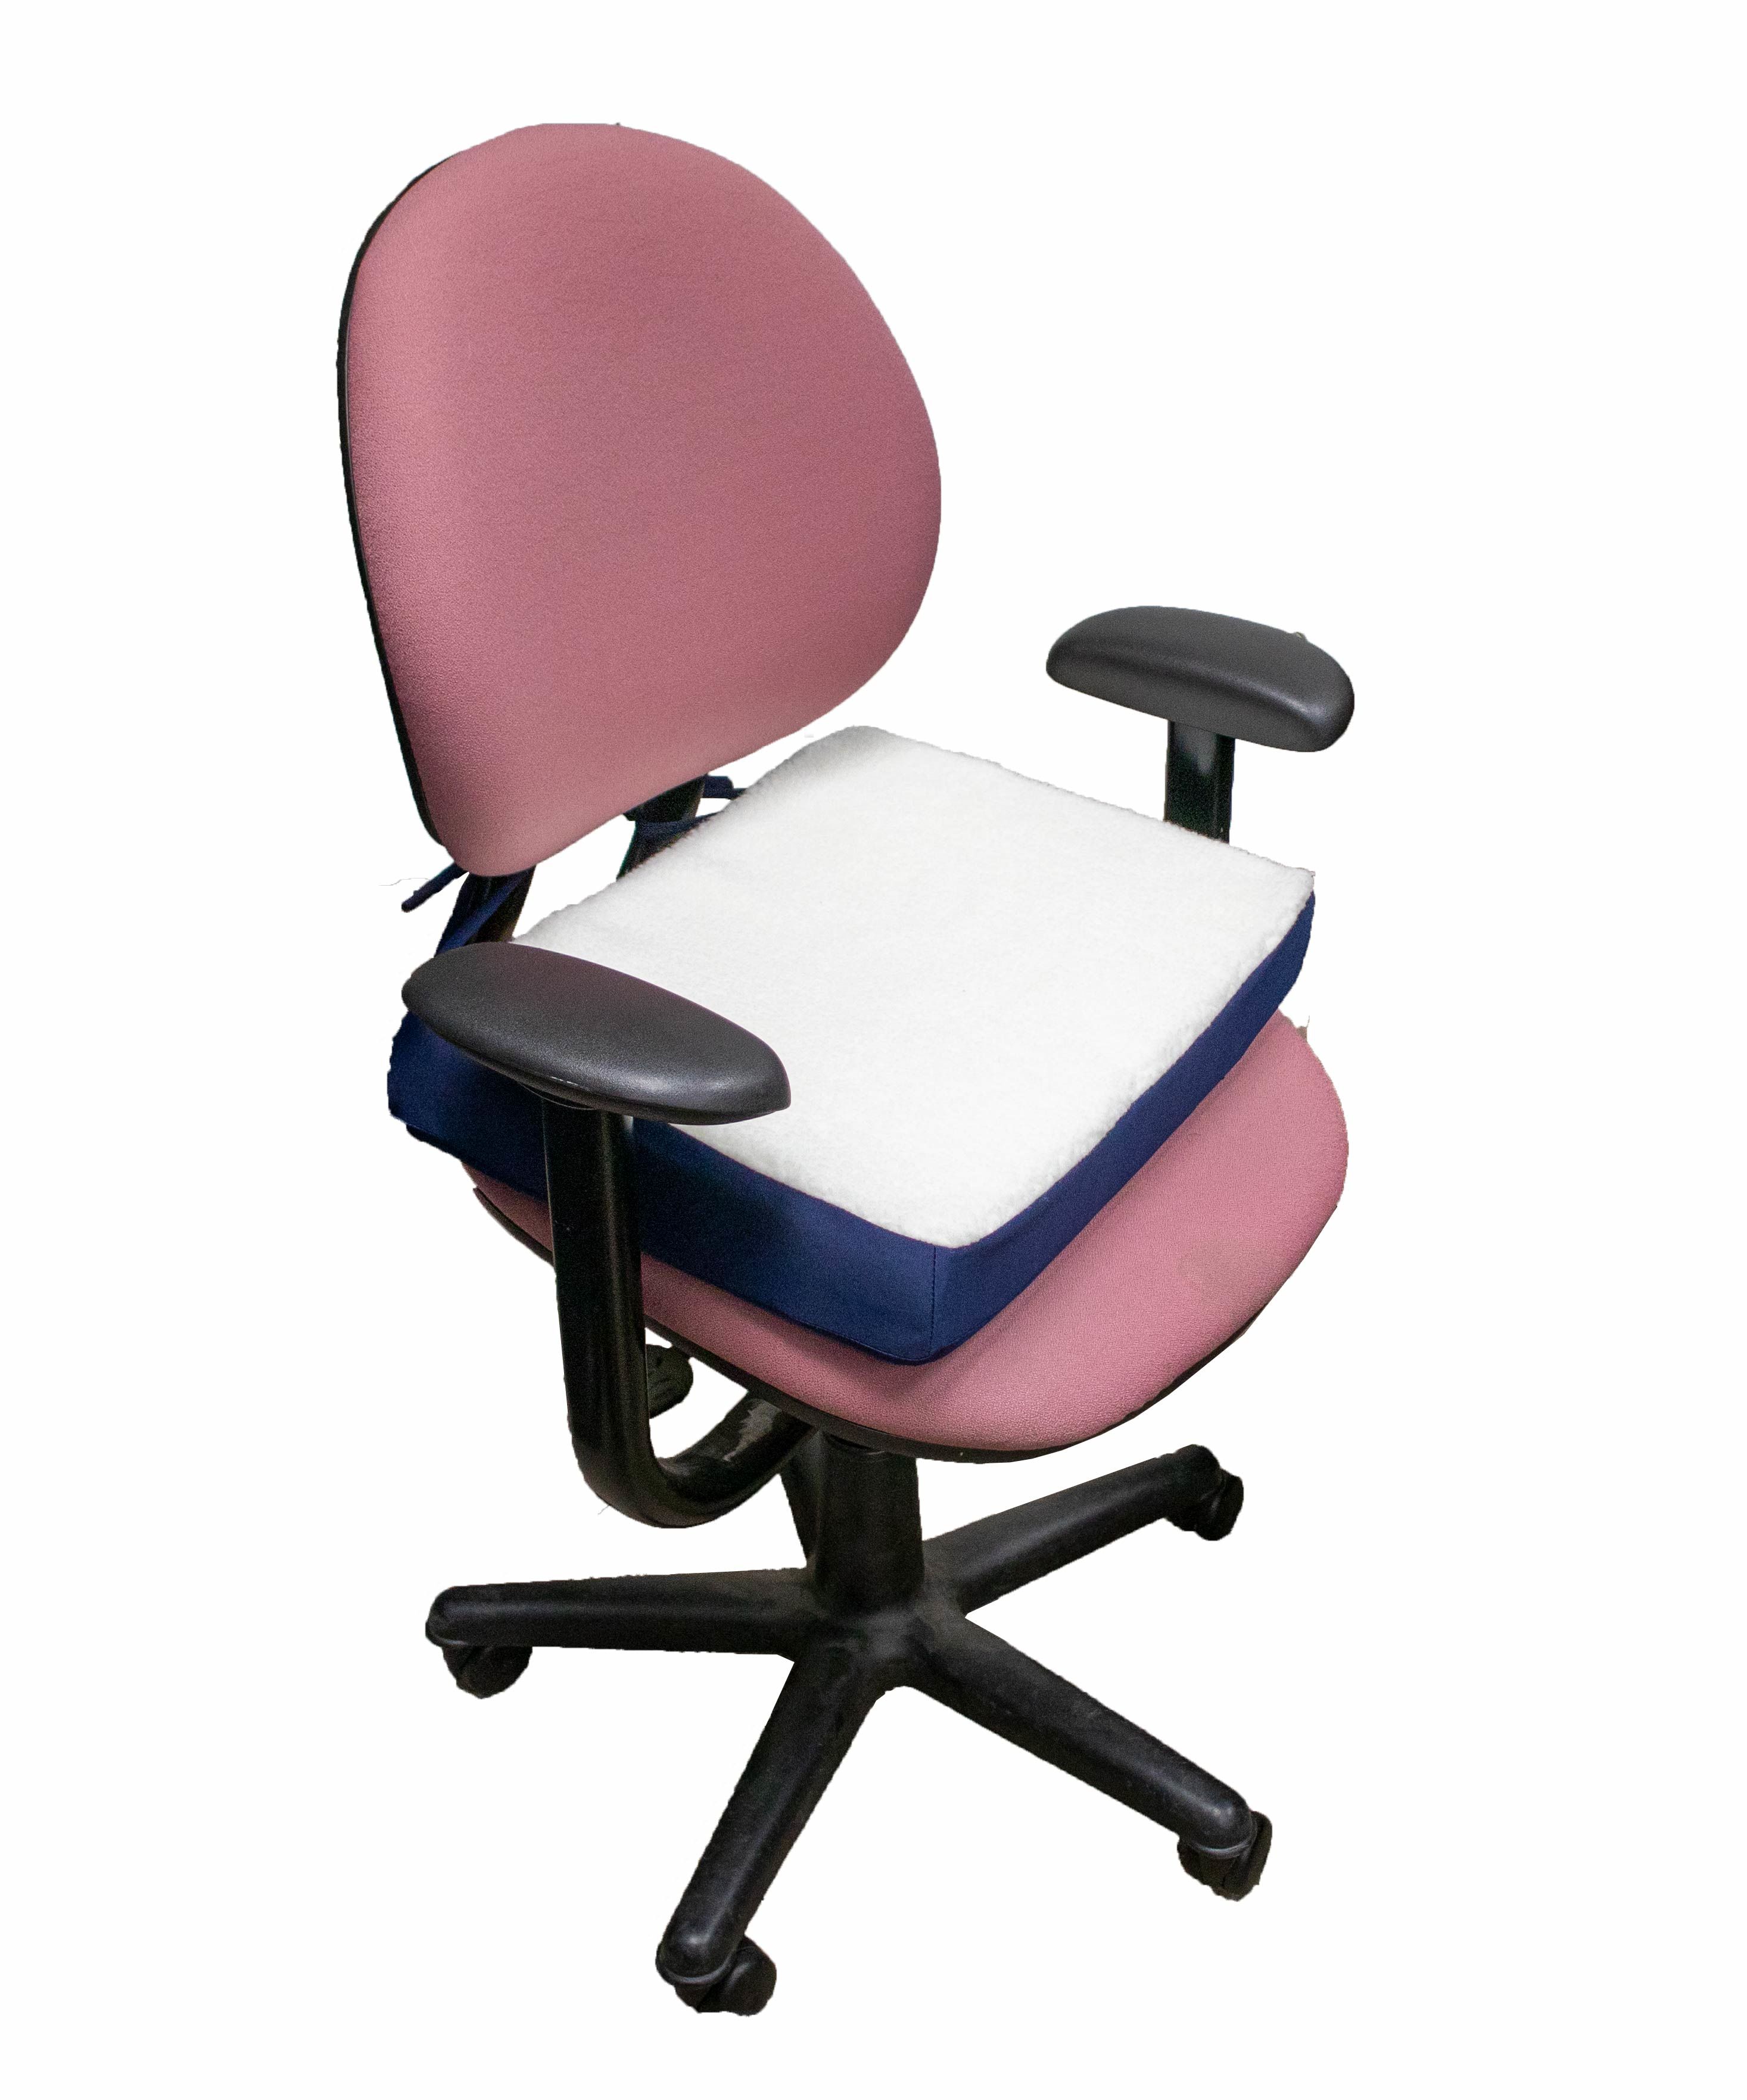 Memory Foam Seat Cushion Suitable for Office Chairs & Car Seats